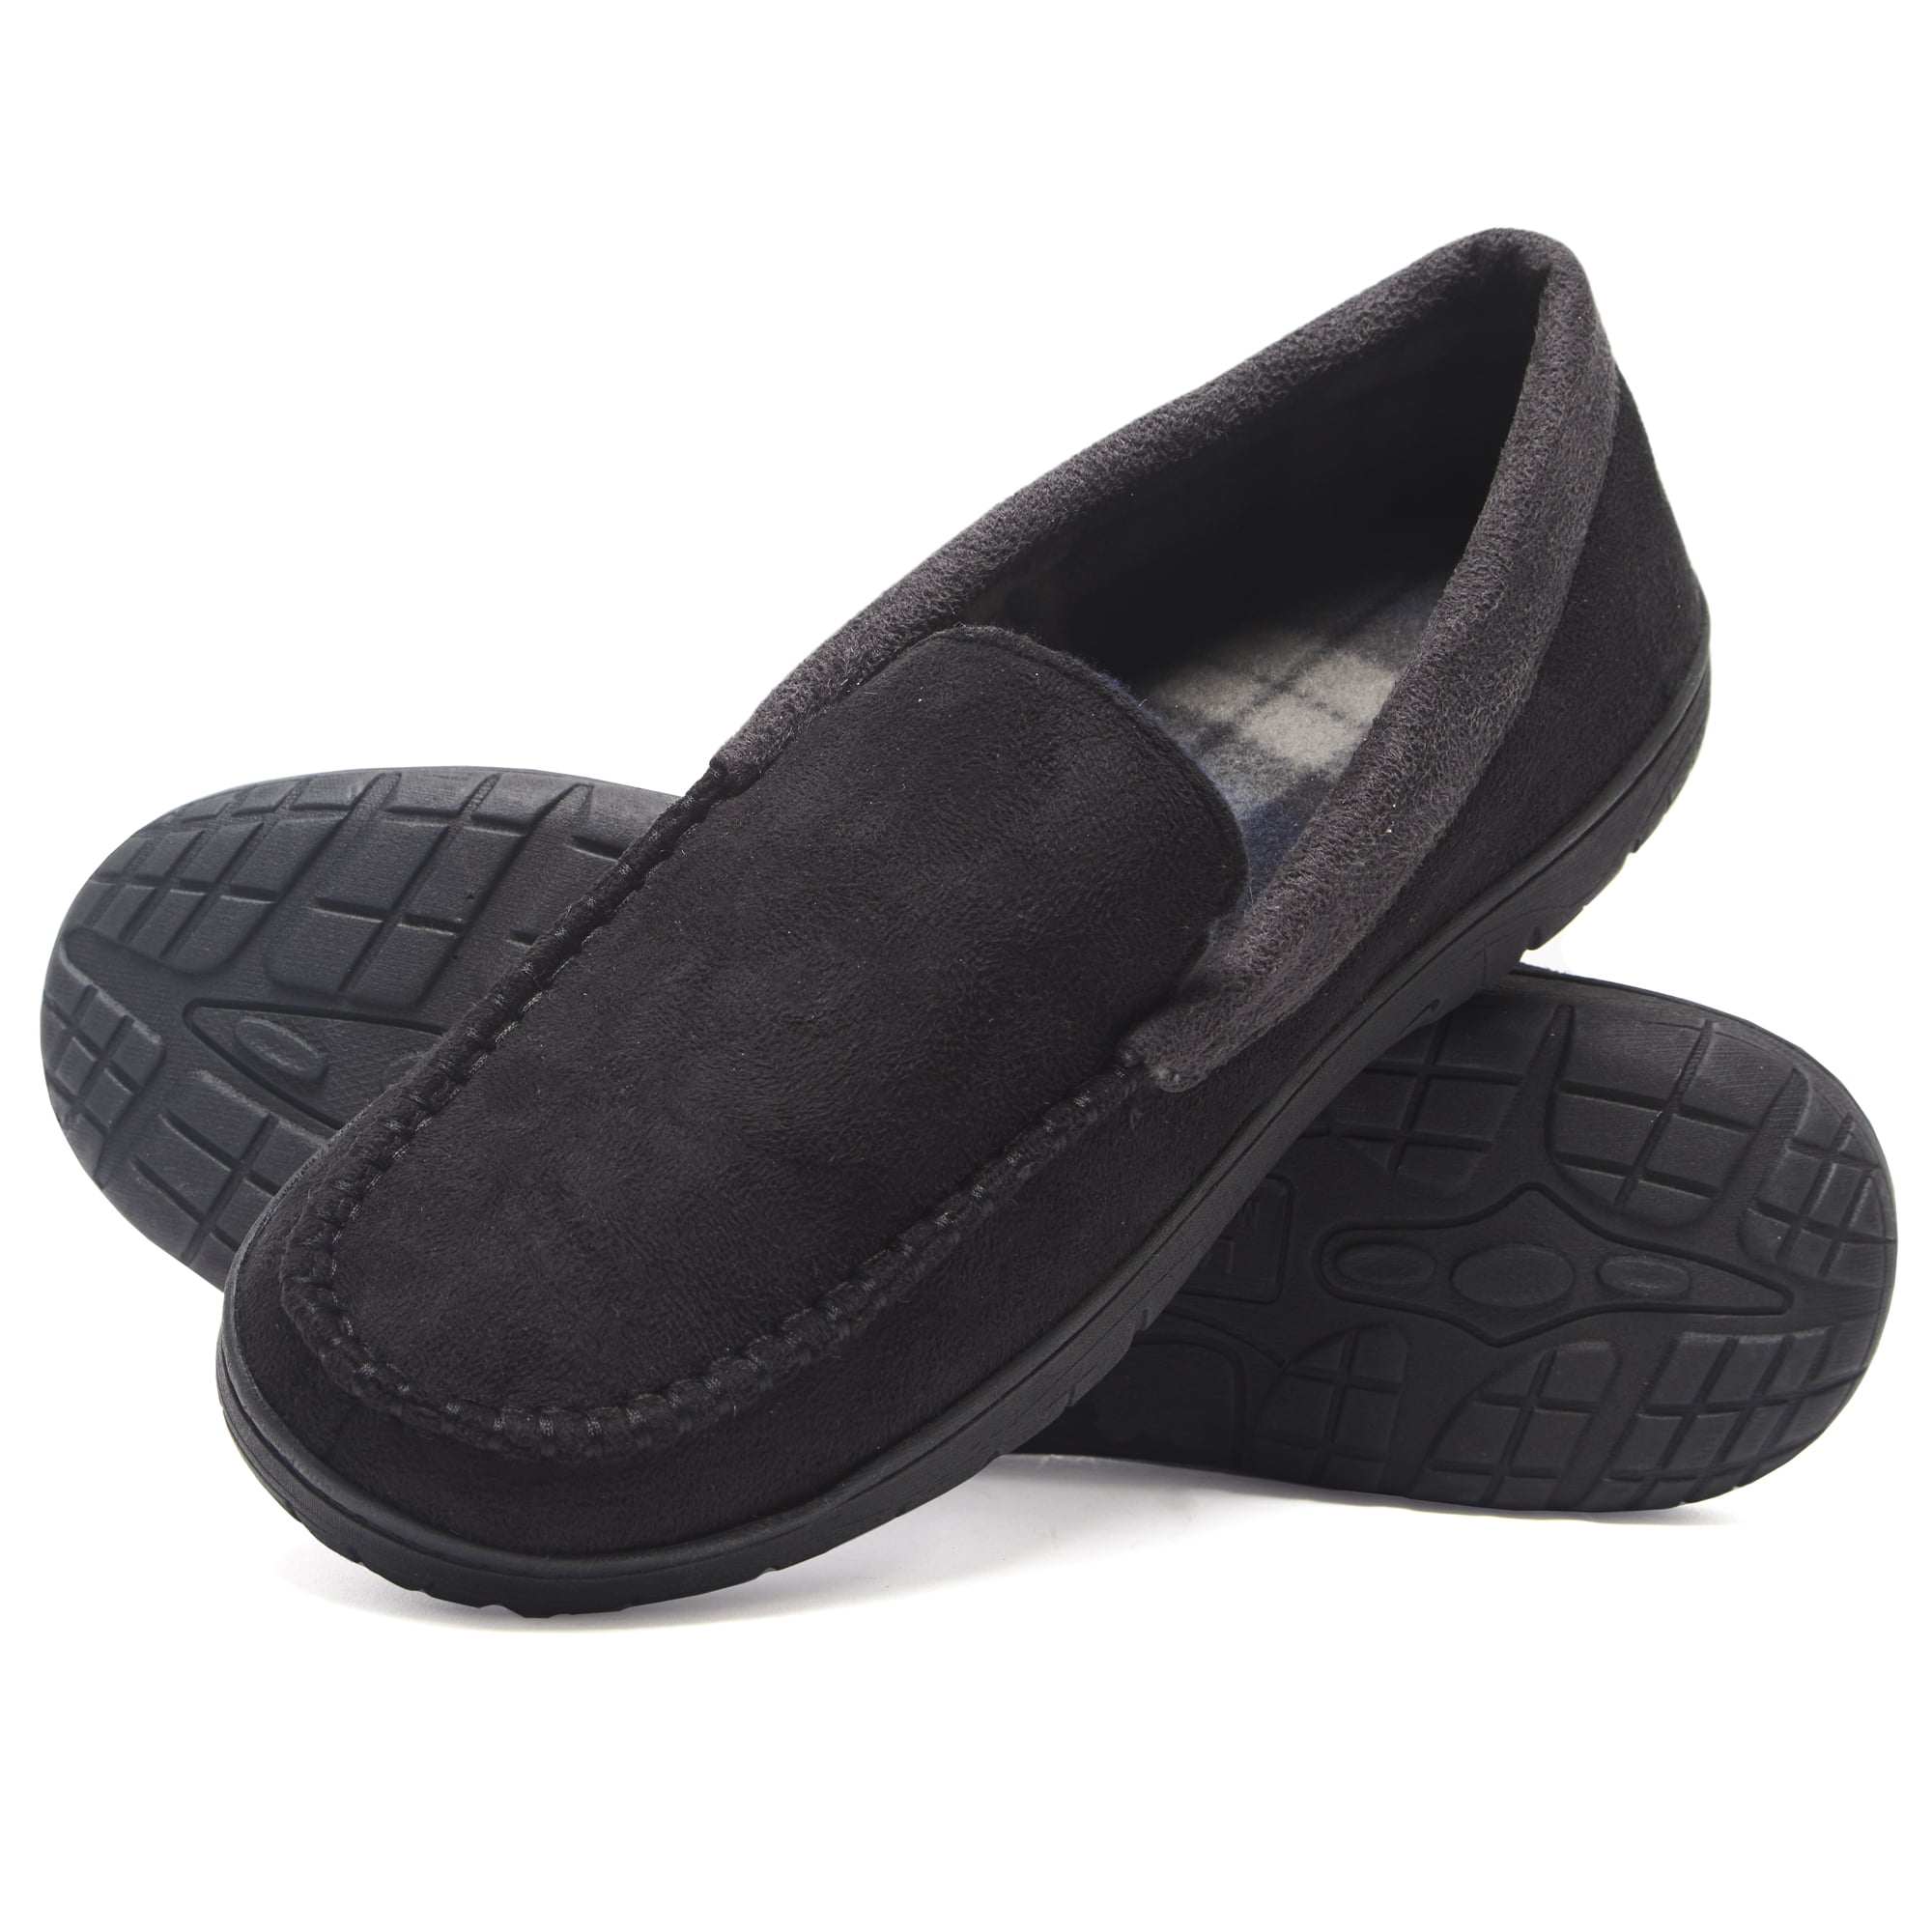 EZ Feet Mens Mixed Material Moccasin with Whipstitch Detail Indoor/Outdoor Breathable Memory Foam Slipper 